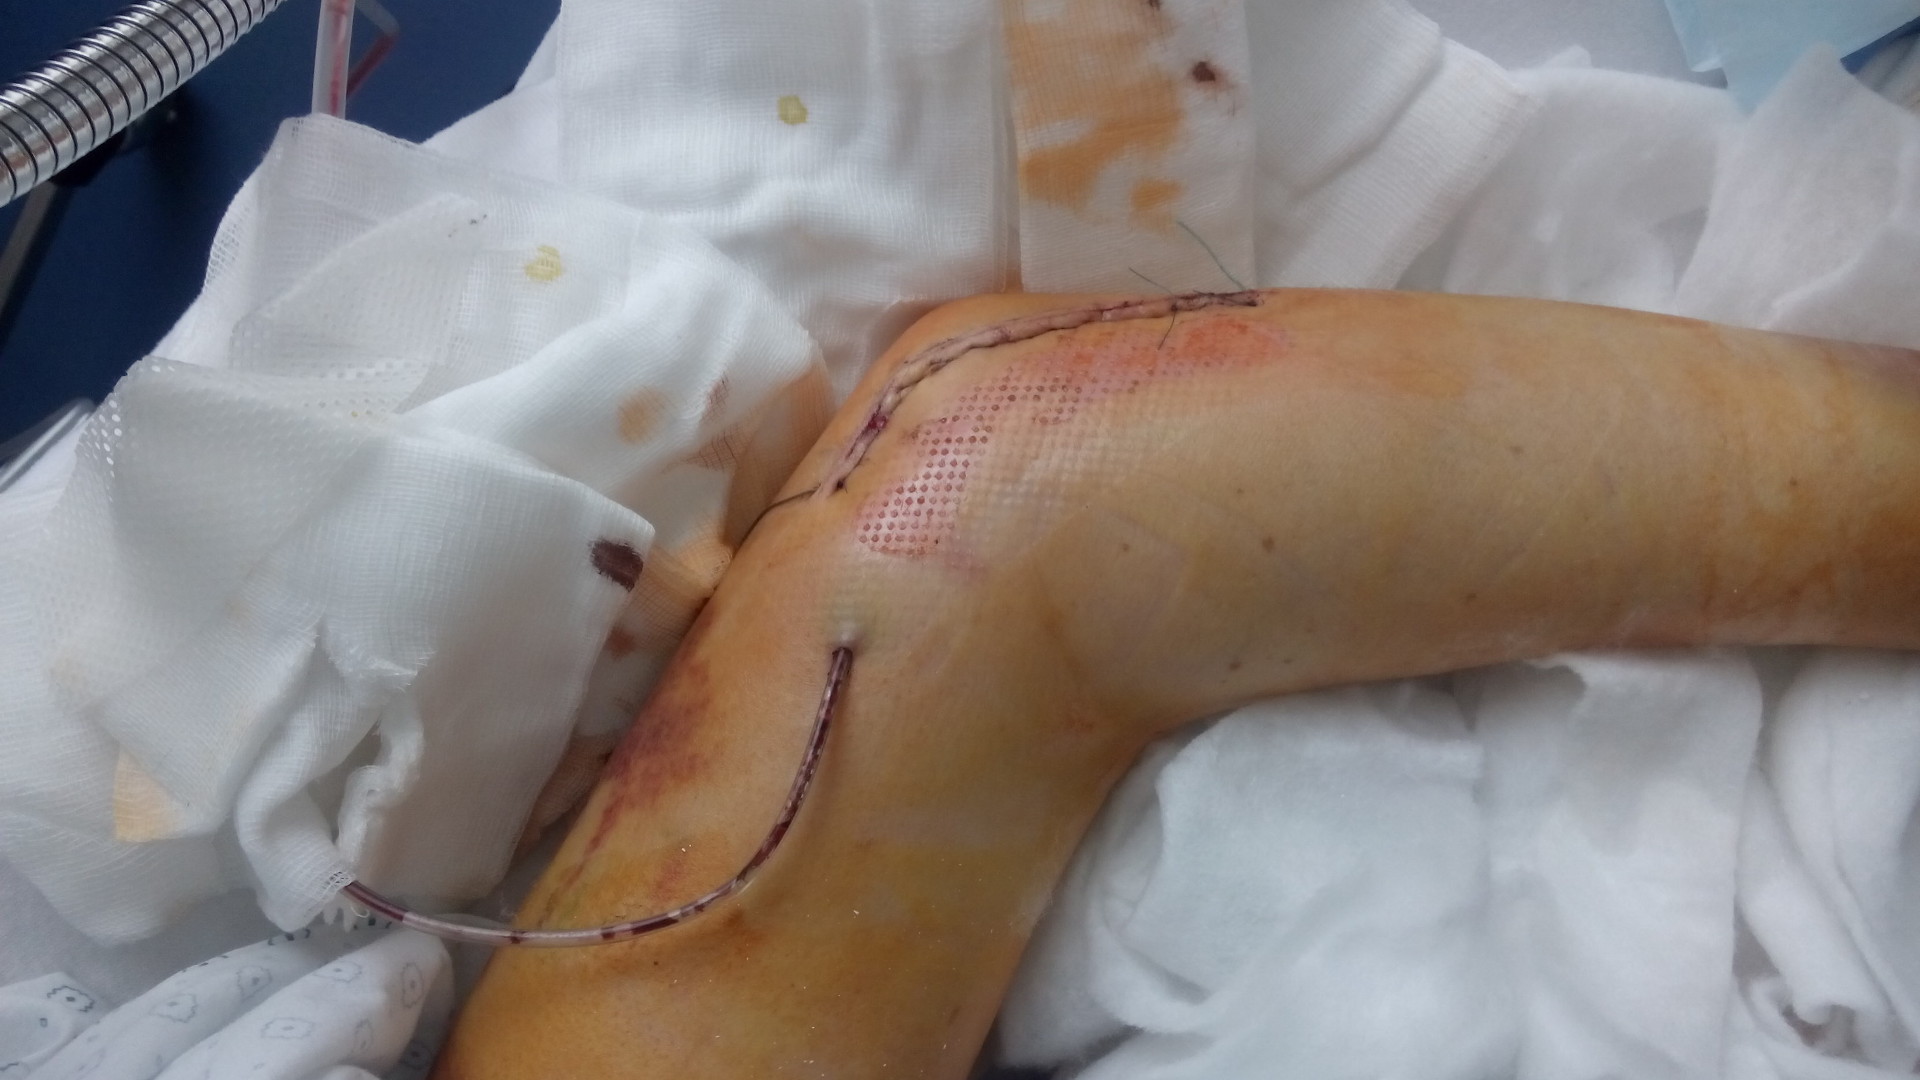 Image of an arm after surgery.